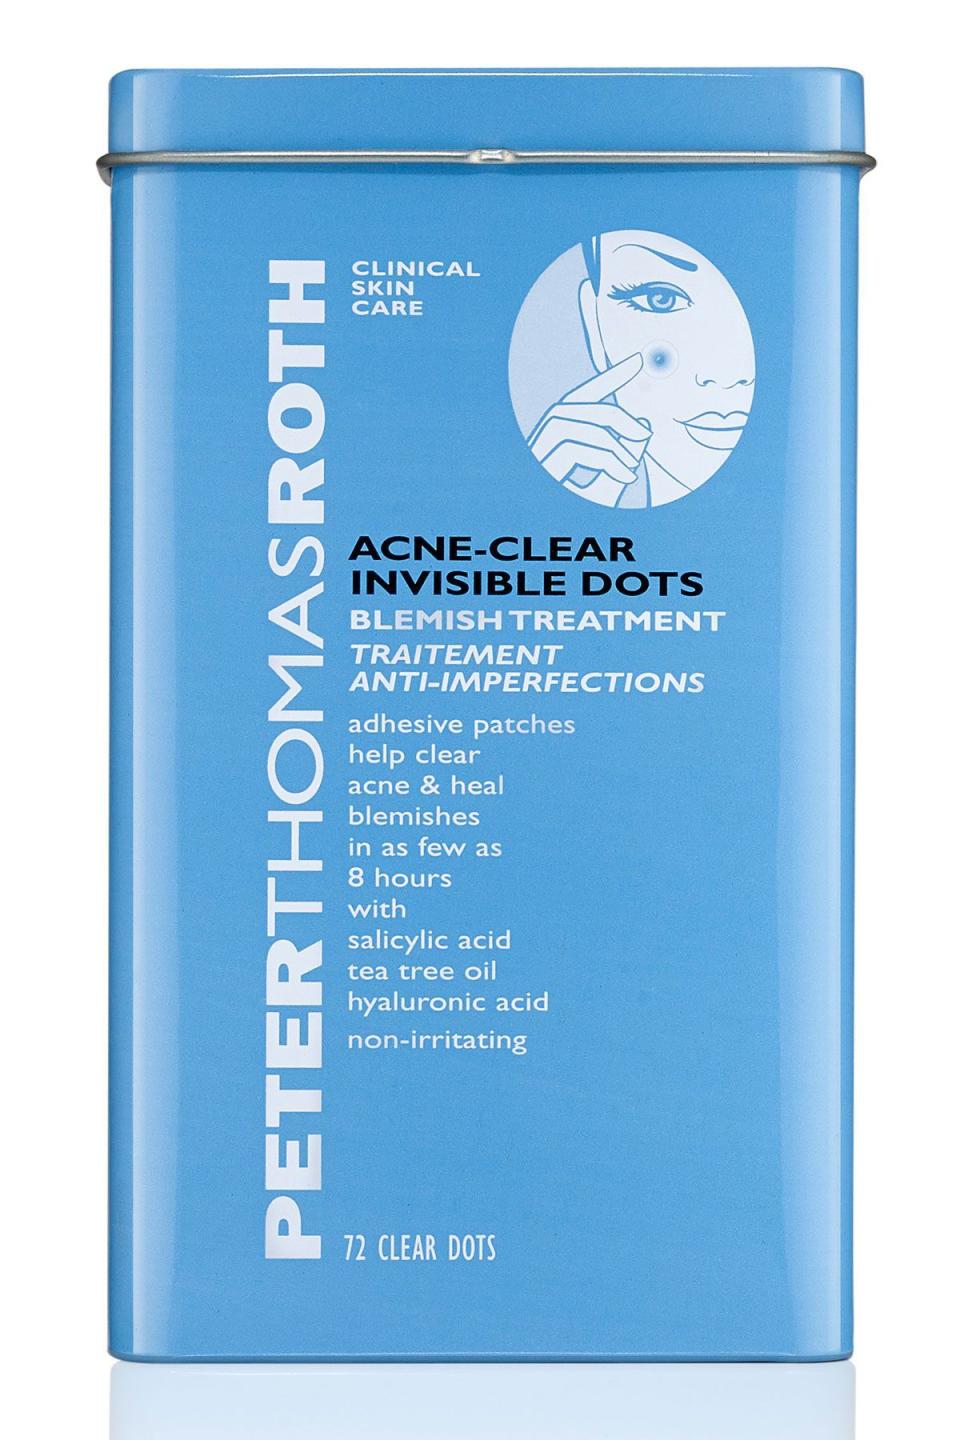 Acne-Clear Invisible Dots